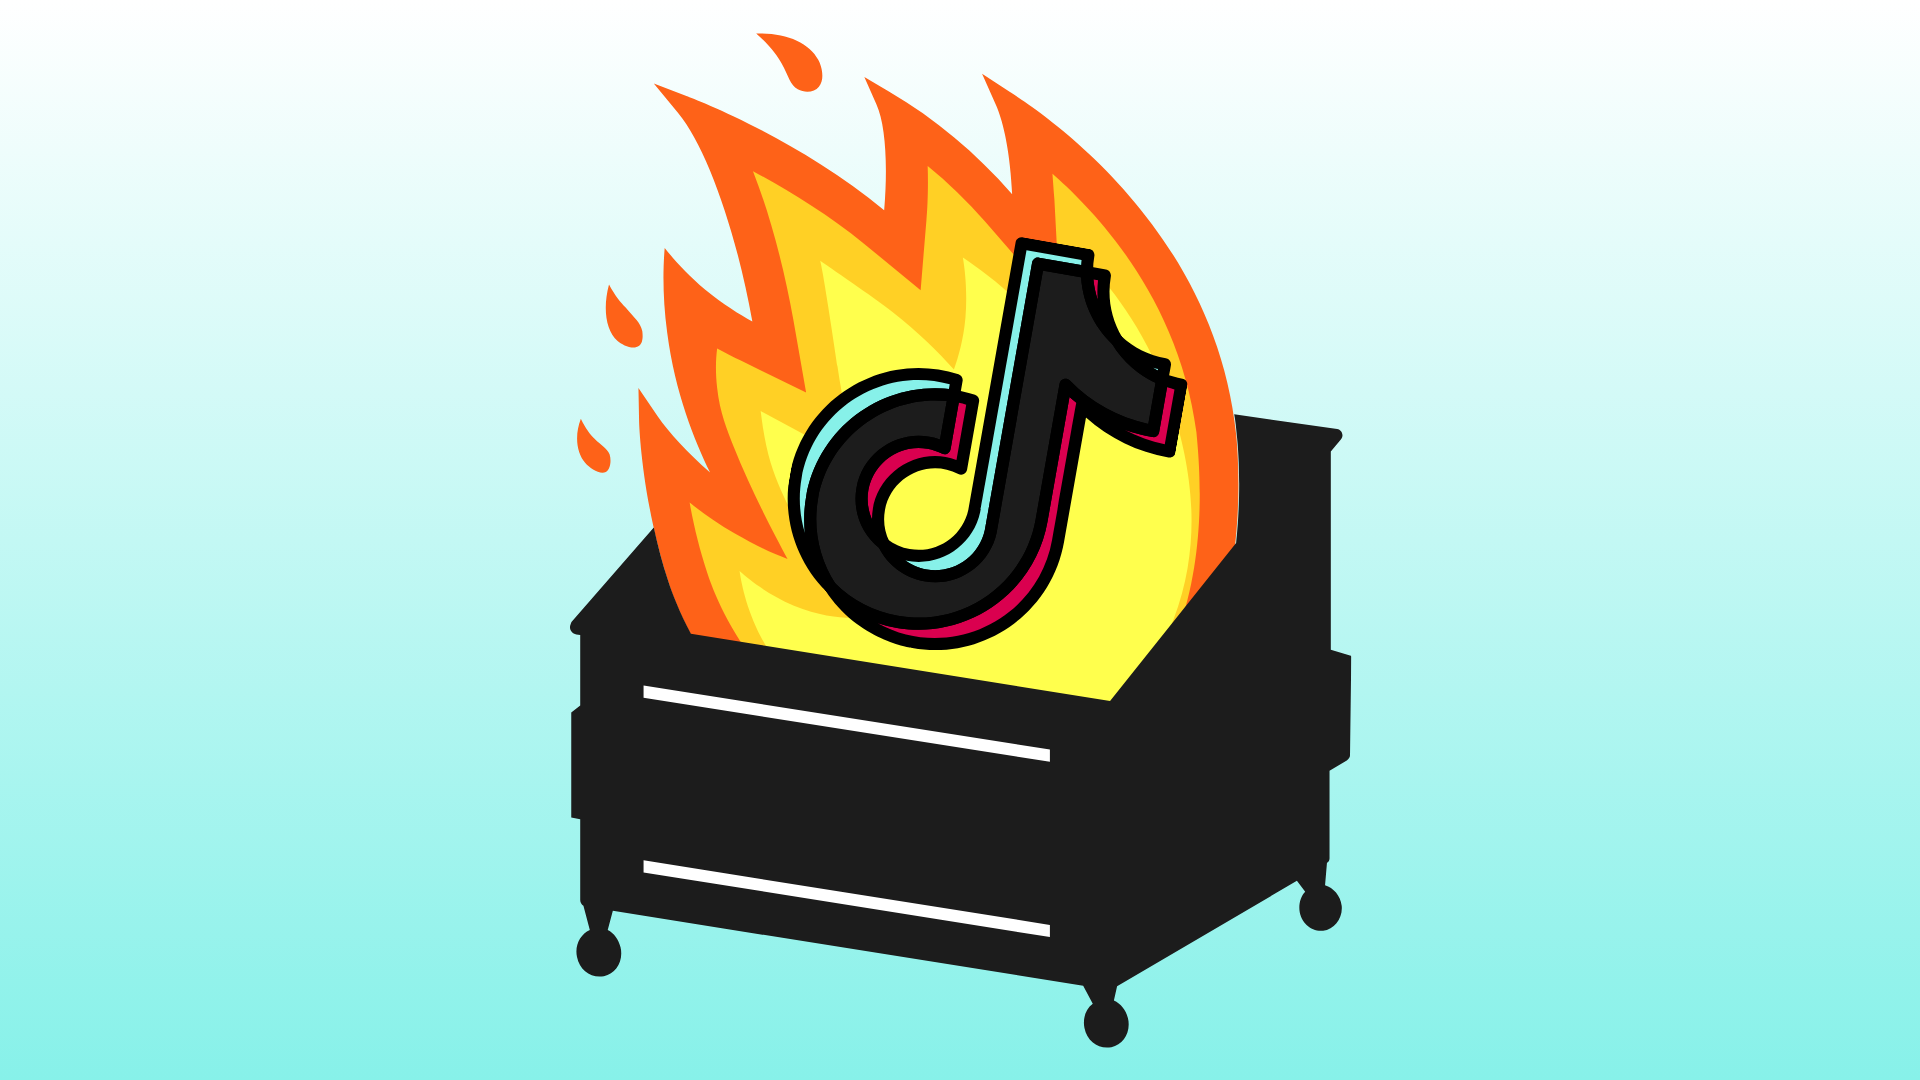 Am illustration of a black dumpster with fire shooting out of it. The TikTok logo can be seen in the flames.